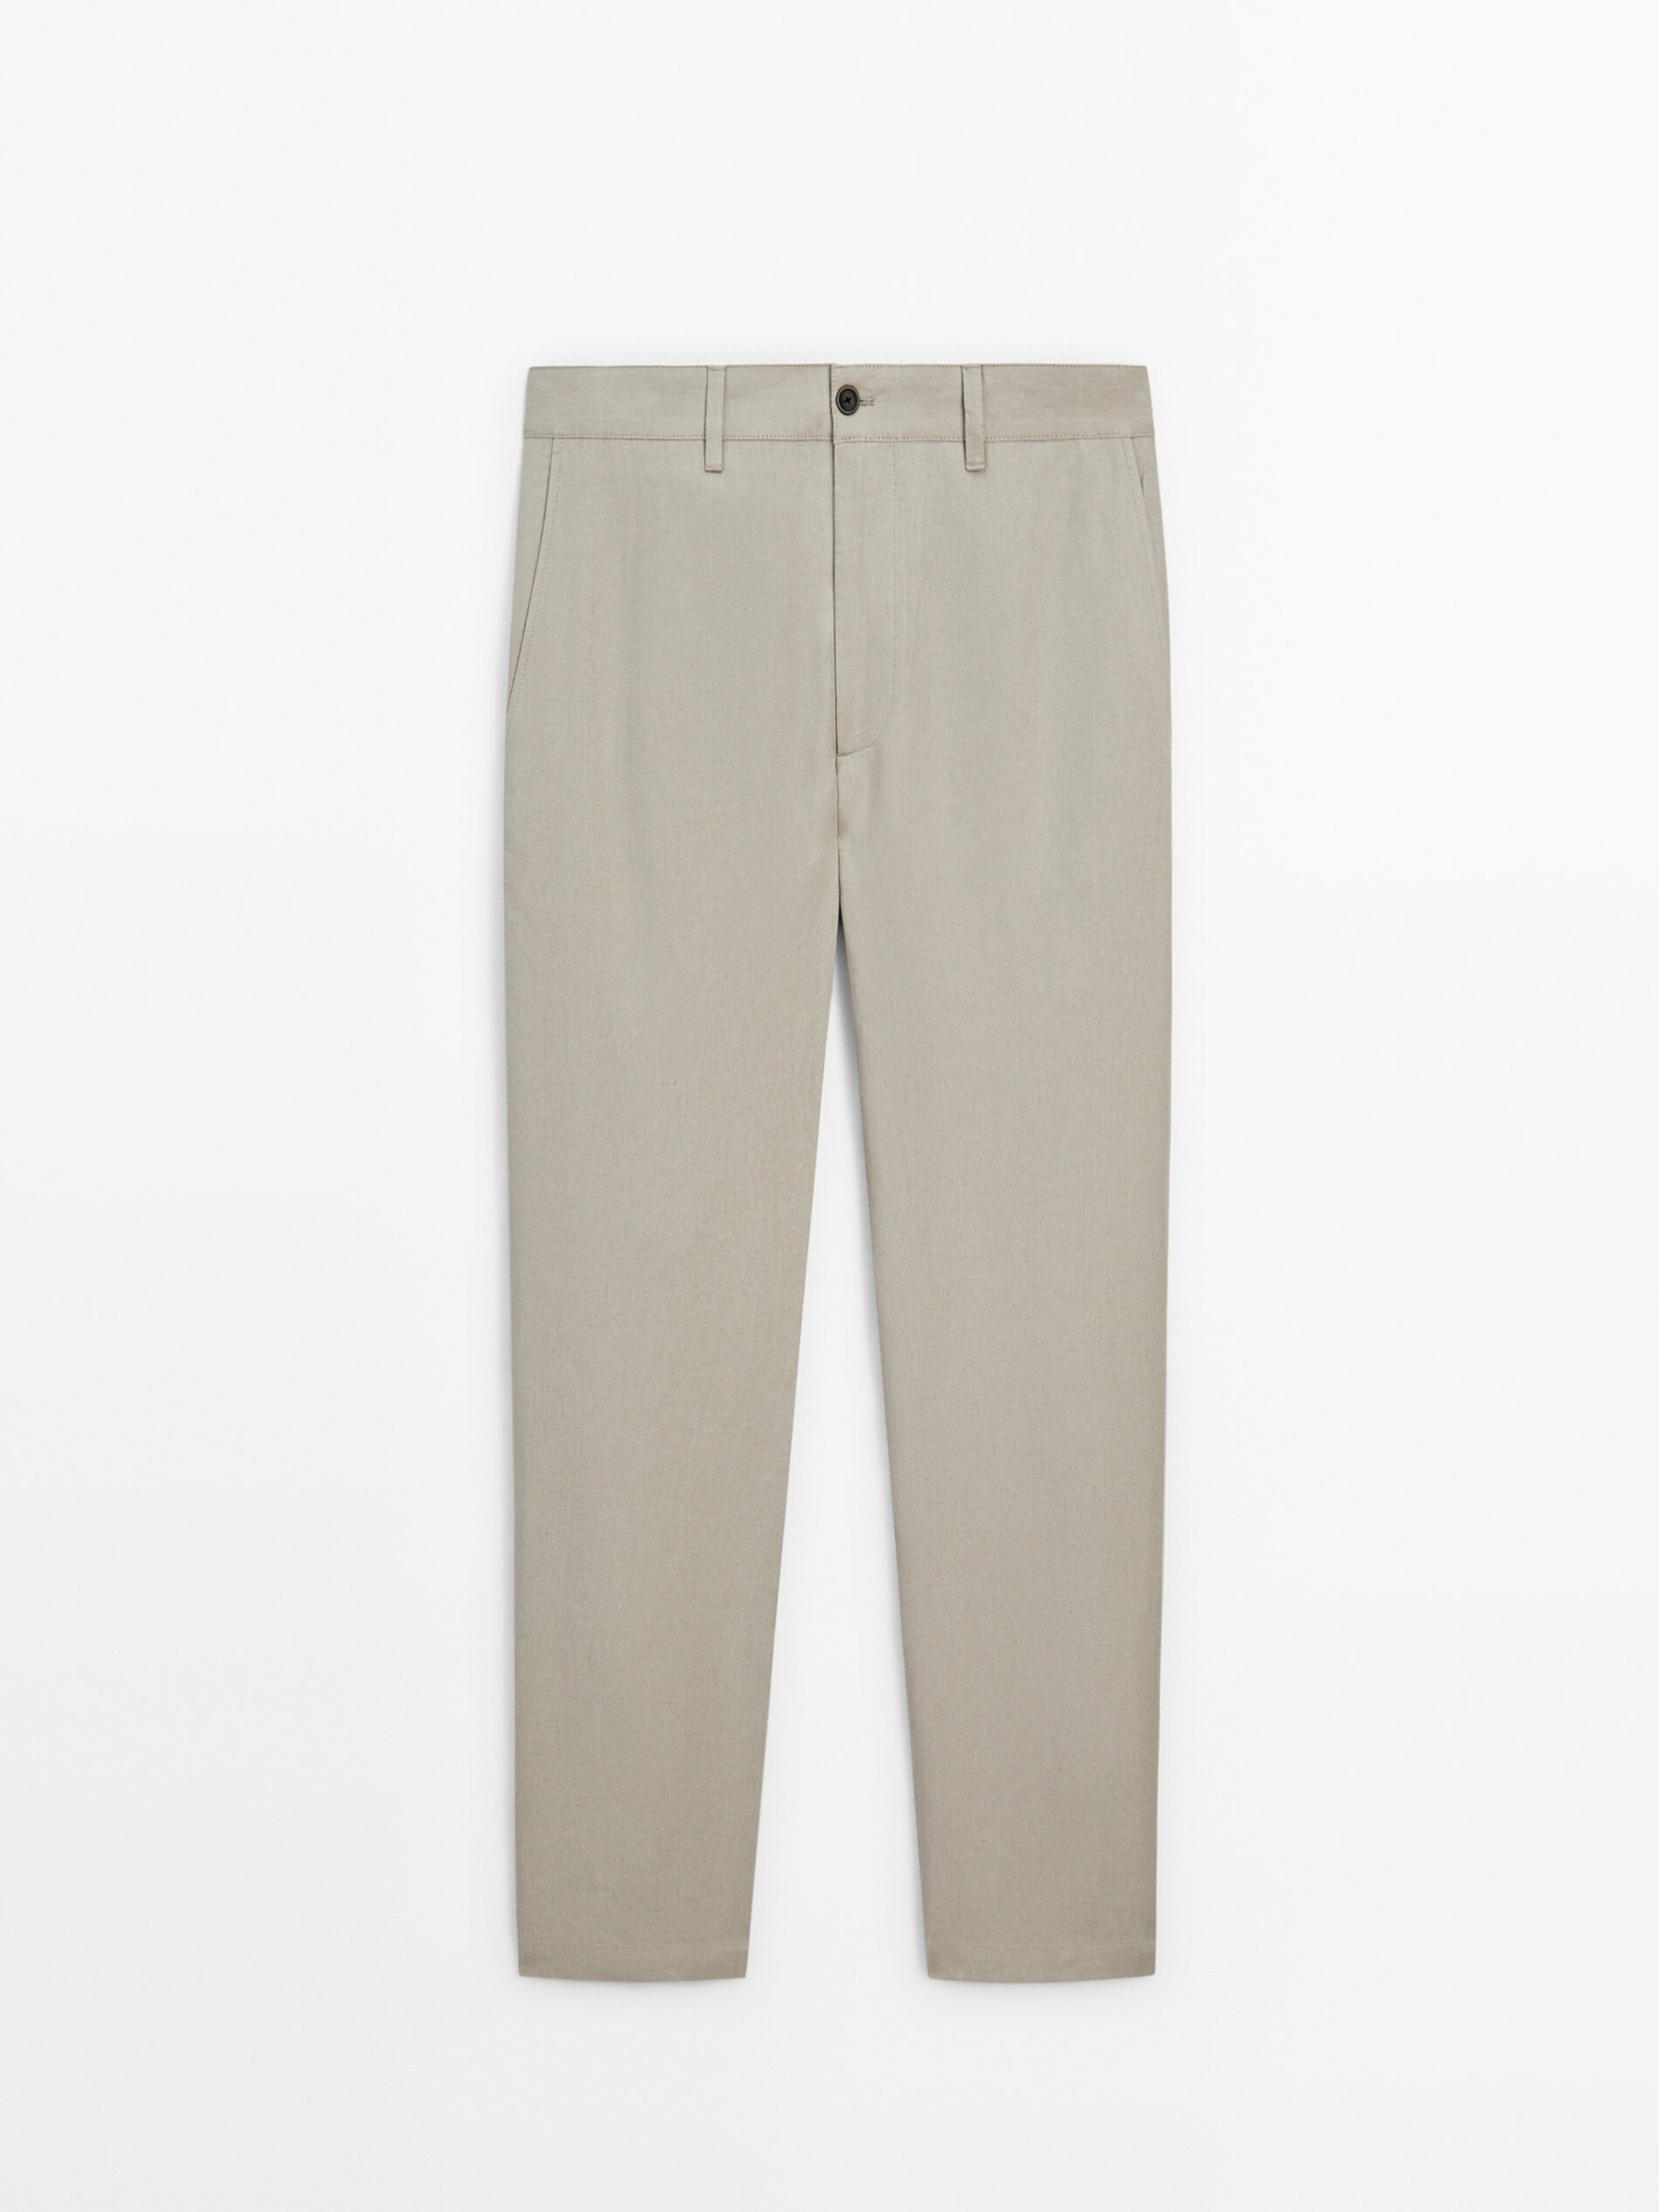 PANTALÓN LINO RELAXED FIT - LIMITED EDITION